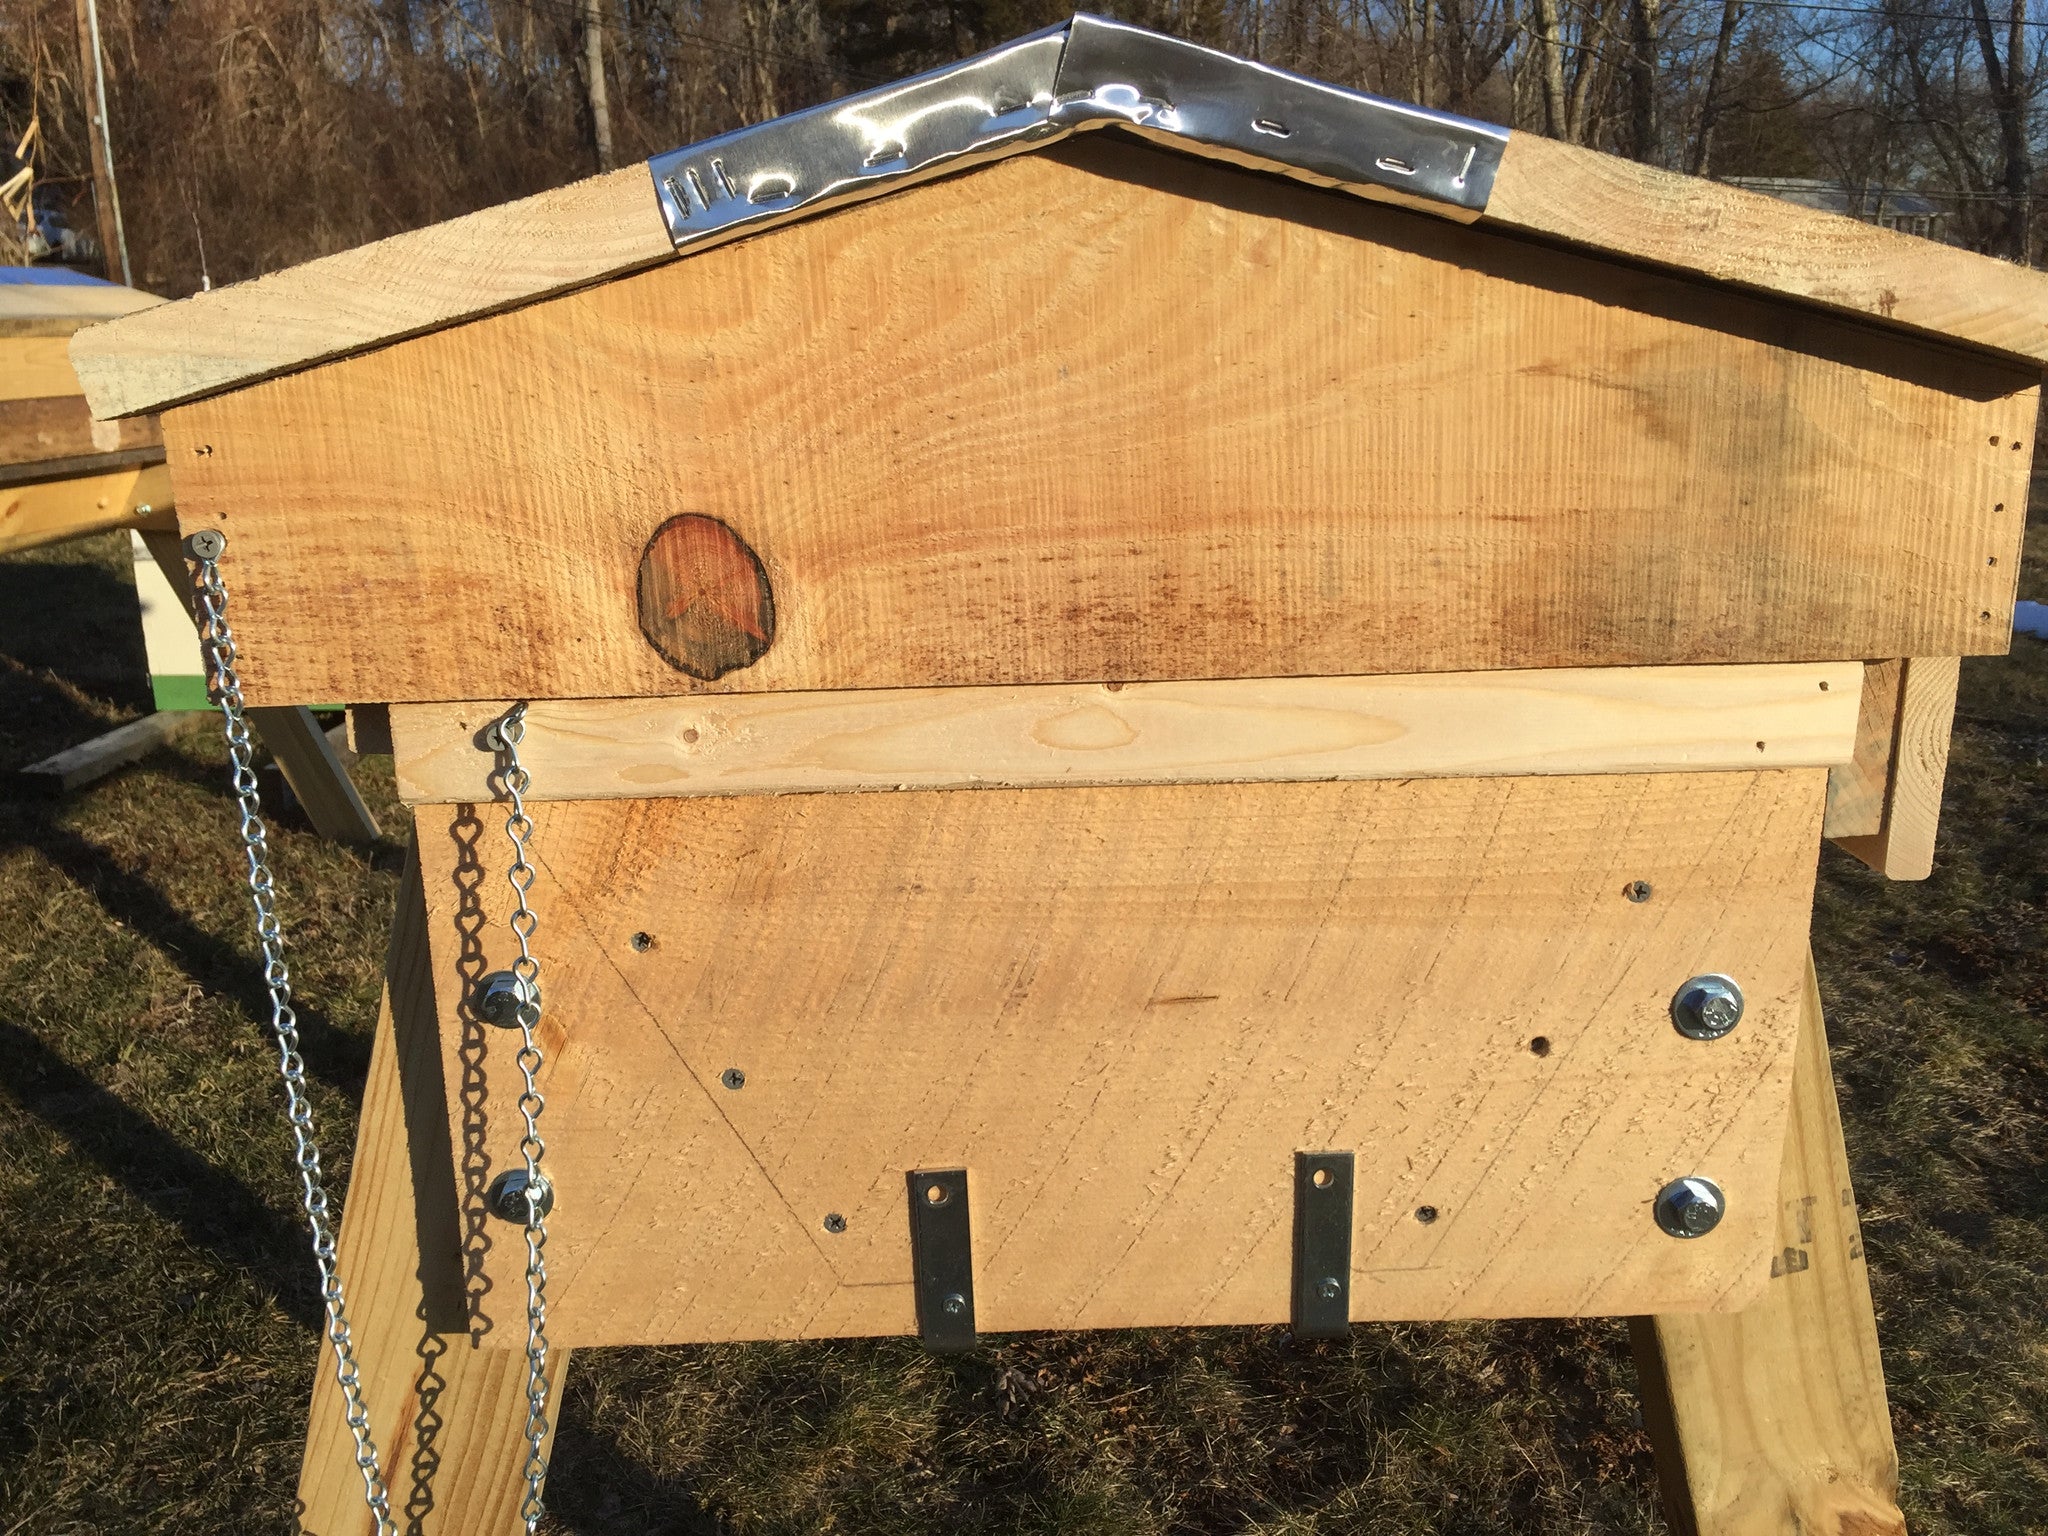 Legs are bolted outside of the hive so you can remove them in the event that you need to move the hive. The bottom board is attached with an L-bracket. It can be hung with a gap below the hive to perform mite counts.